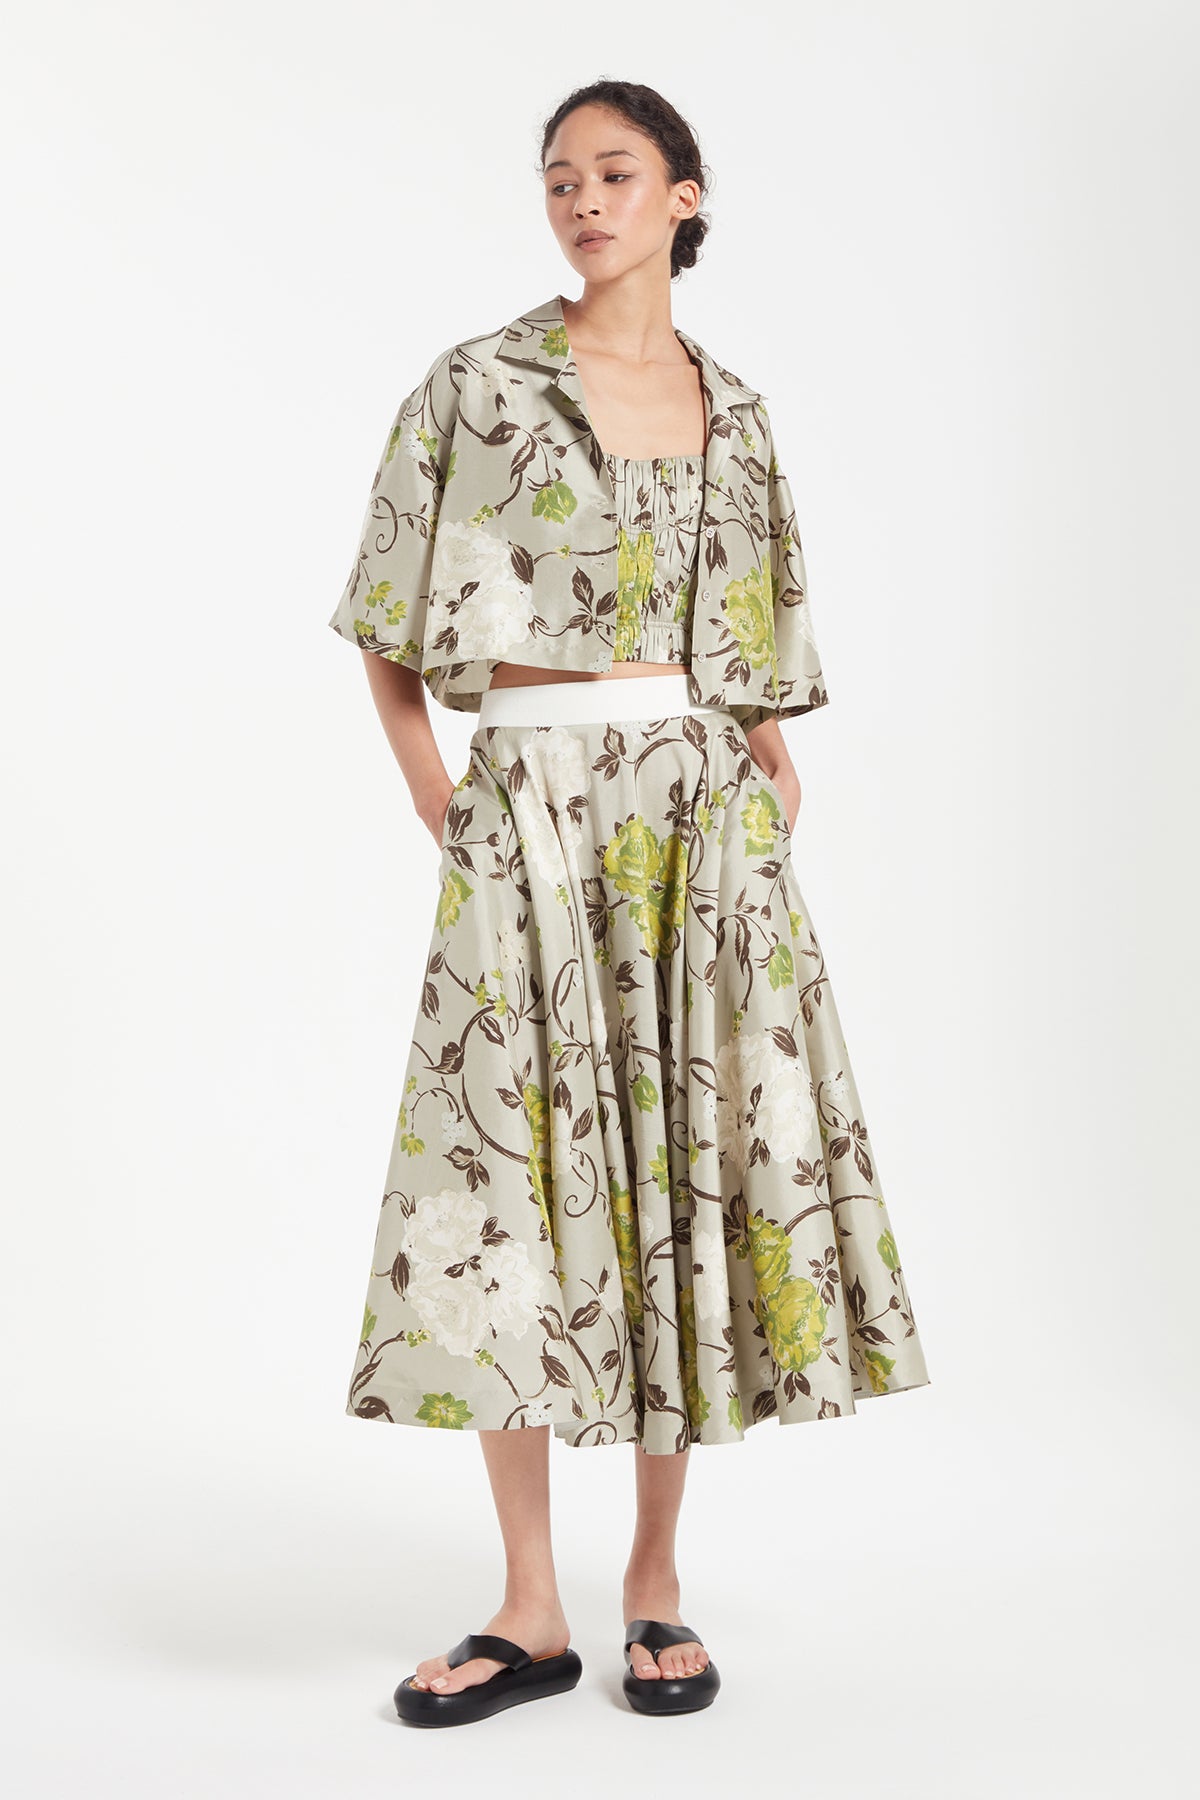 Taylor Skirt in Floral| Noon by Noor